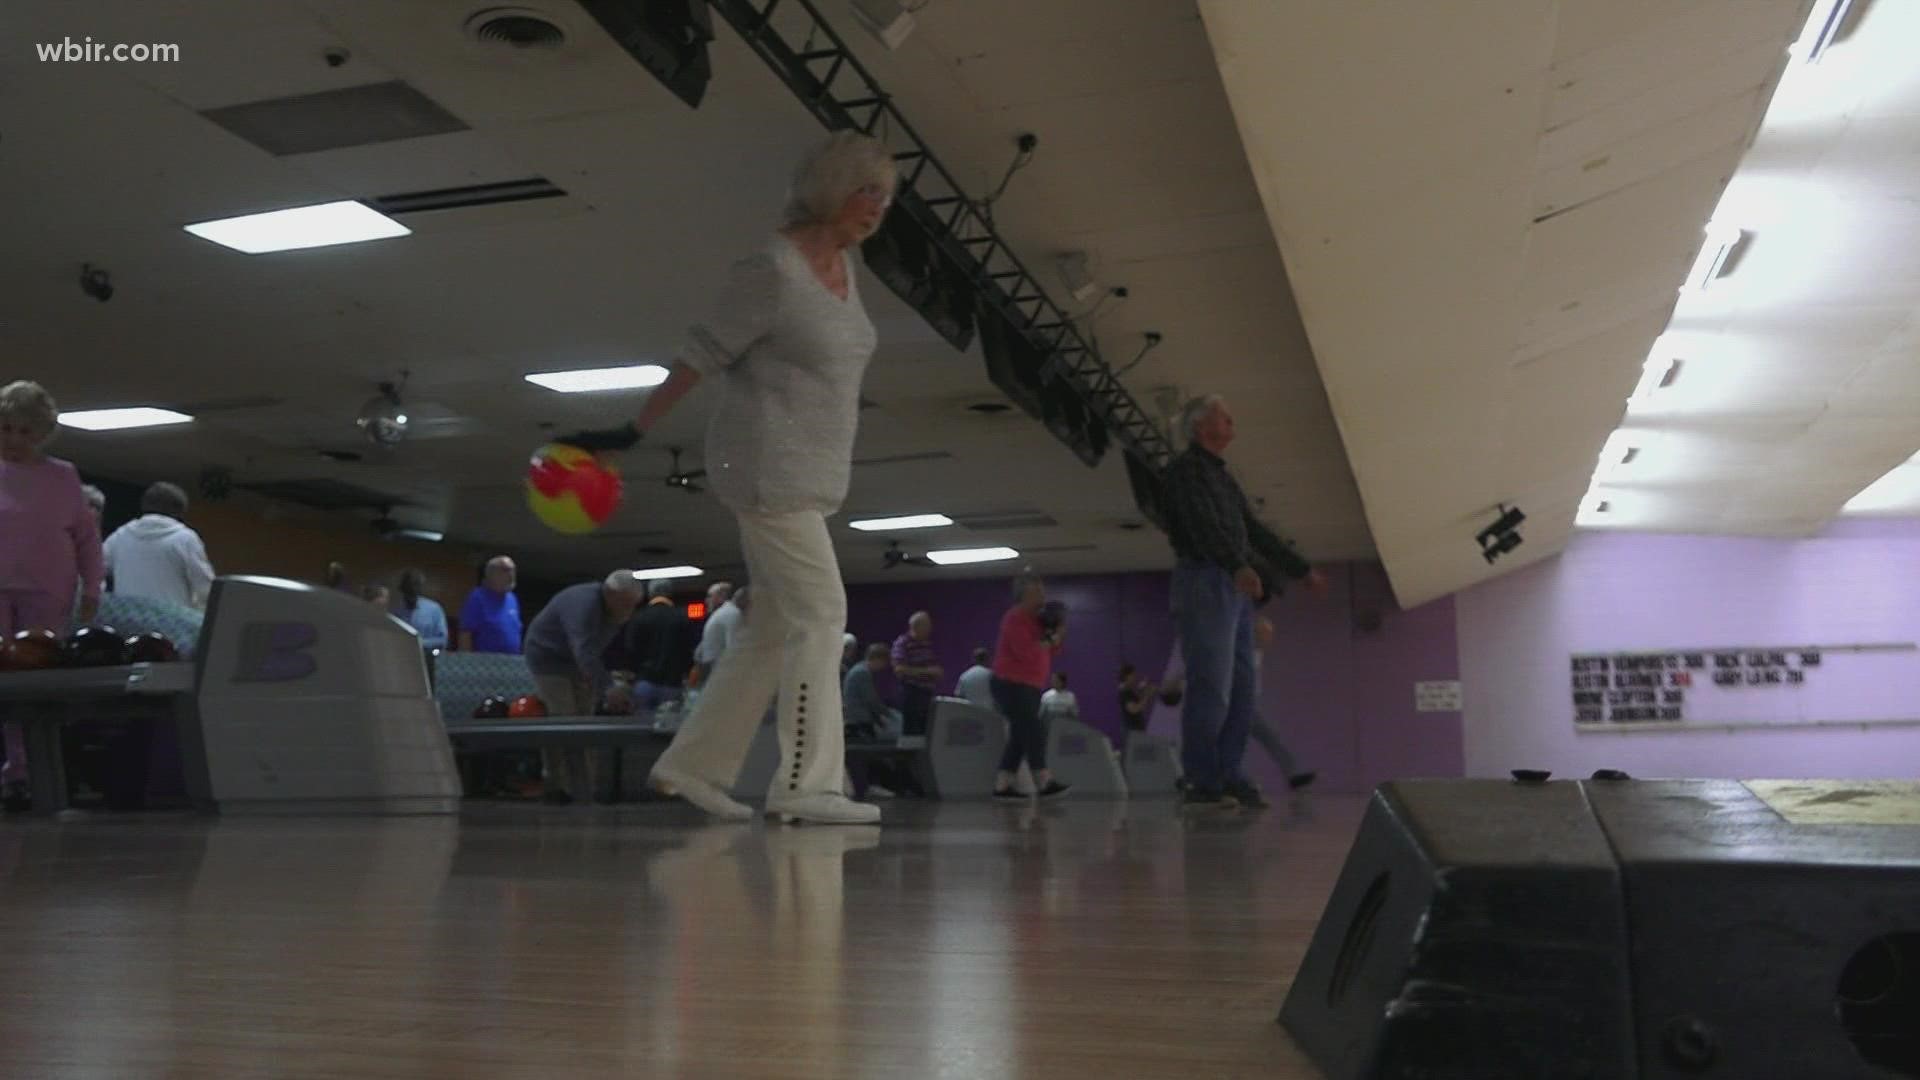 Meg Ruckman's favorite place to be is at the bowling alley. She and her league, the Spunk Seniors, appreciate the sport that's right up their alley.